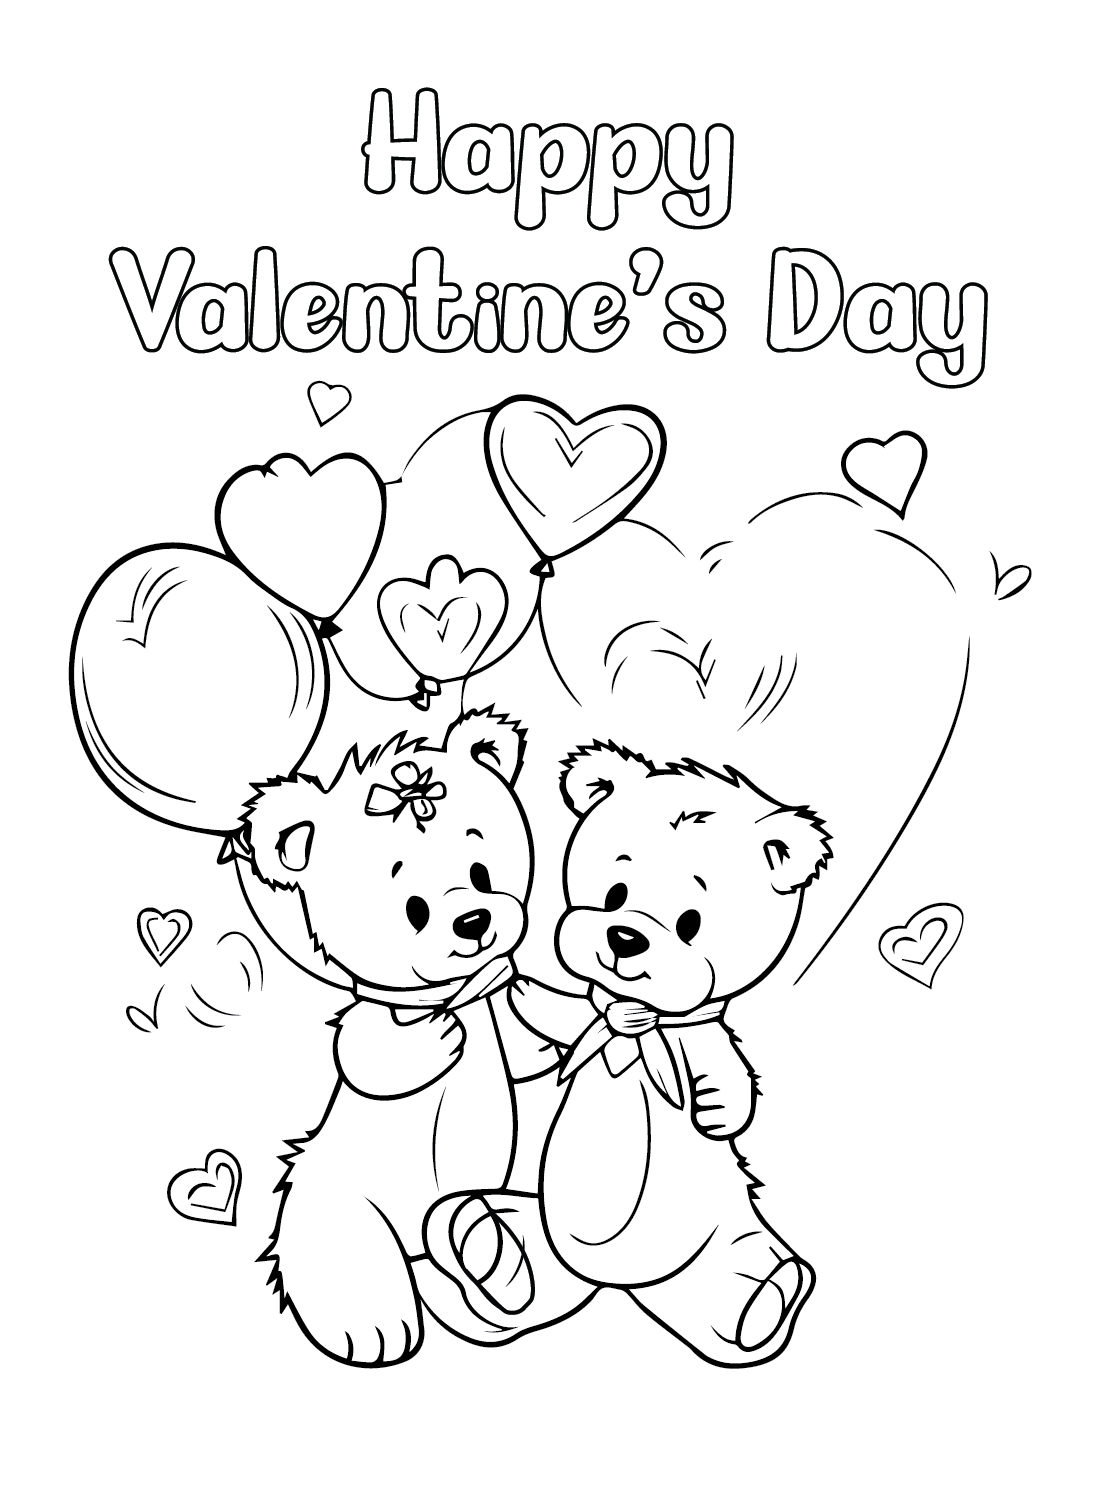 Valentines Day Cards - Coloring Online Free